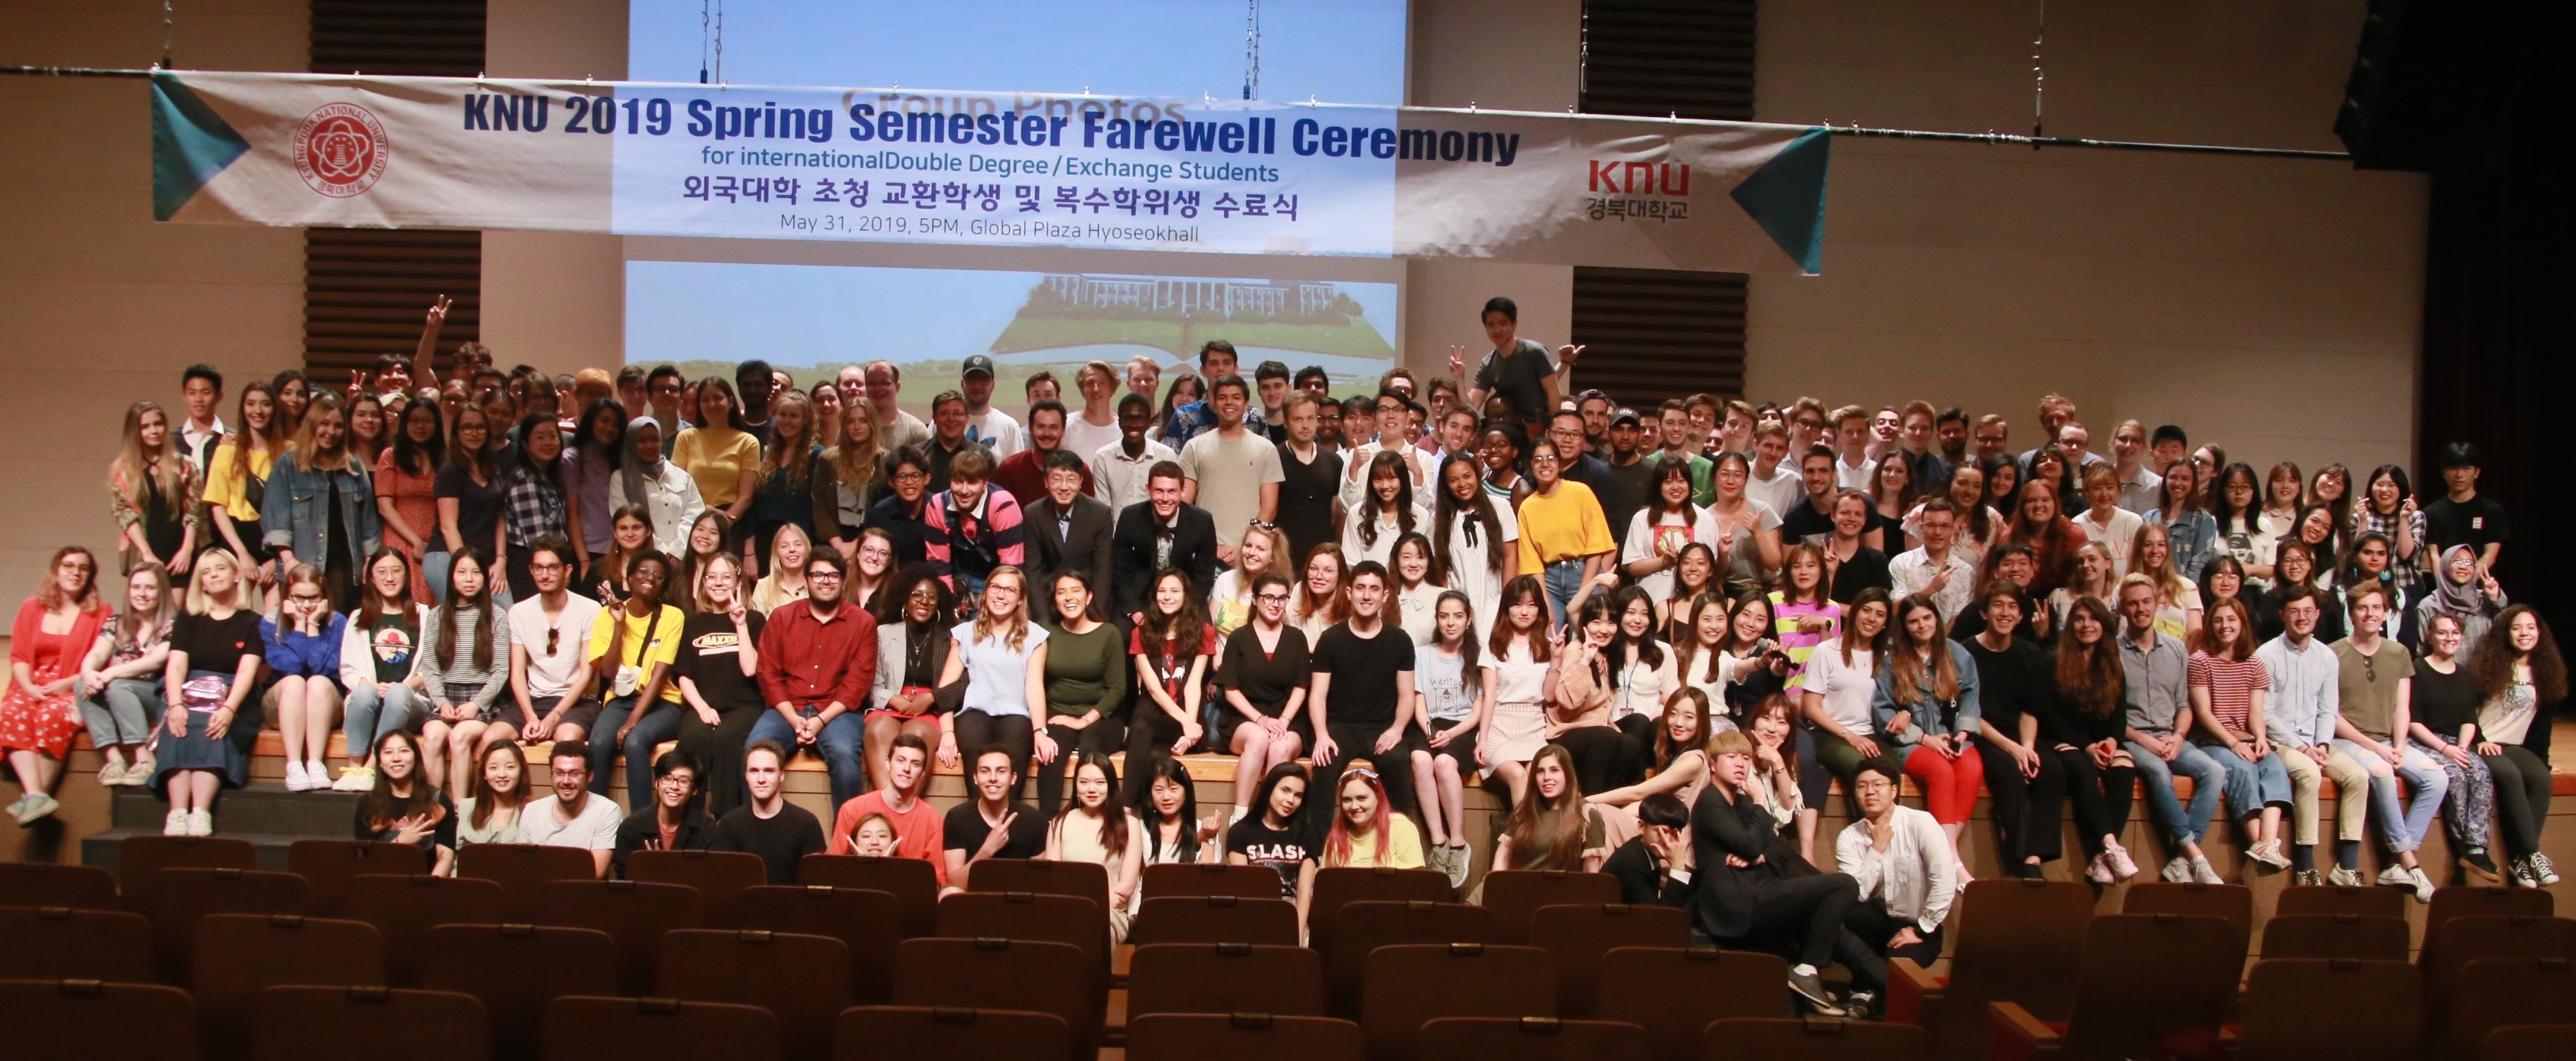 Spring 2019 Farewell Ceremony for International Exchange and Double degree Students 관련 이미지입니다